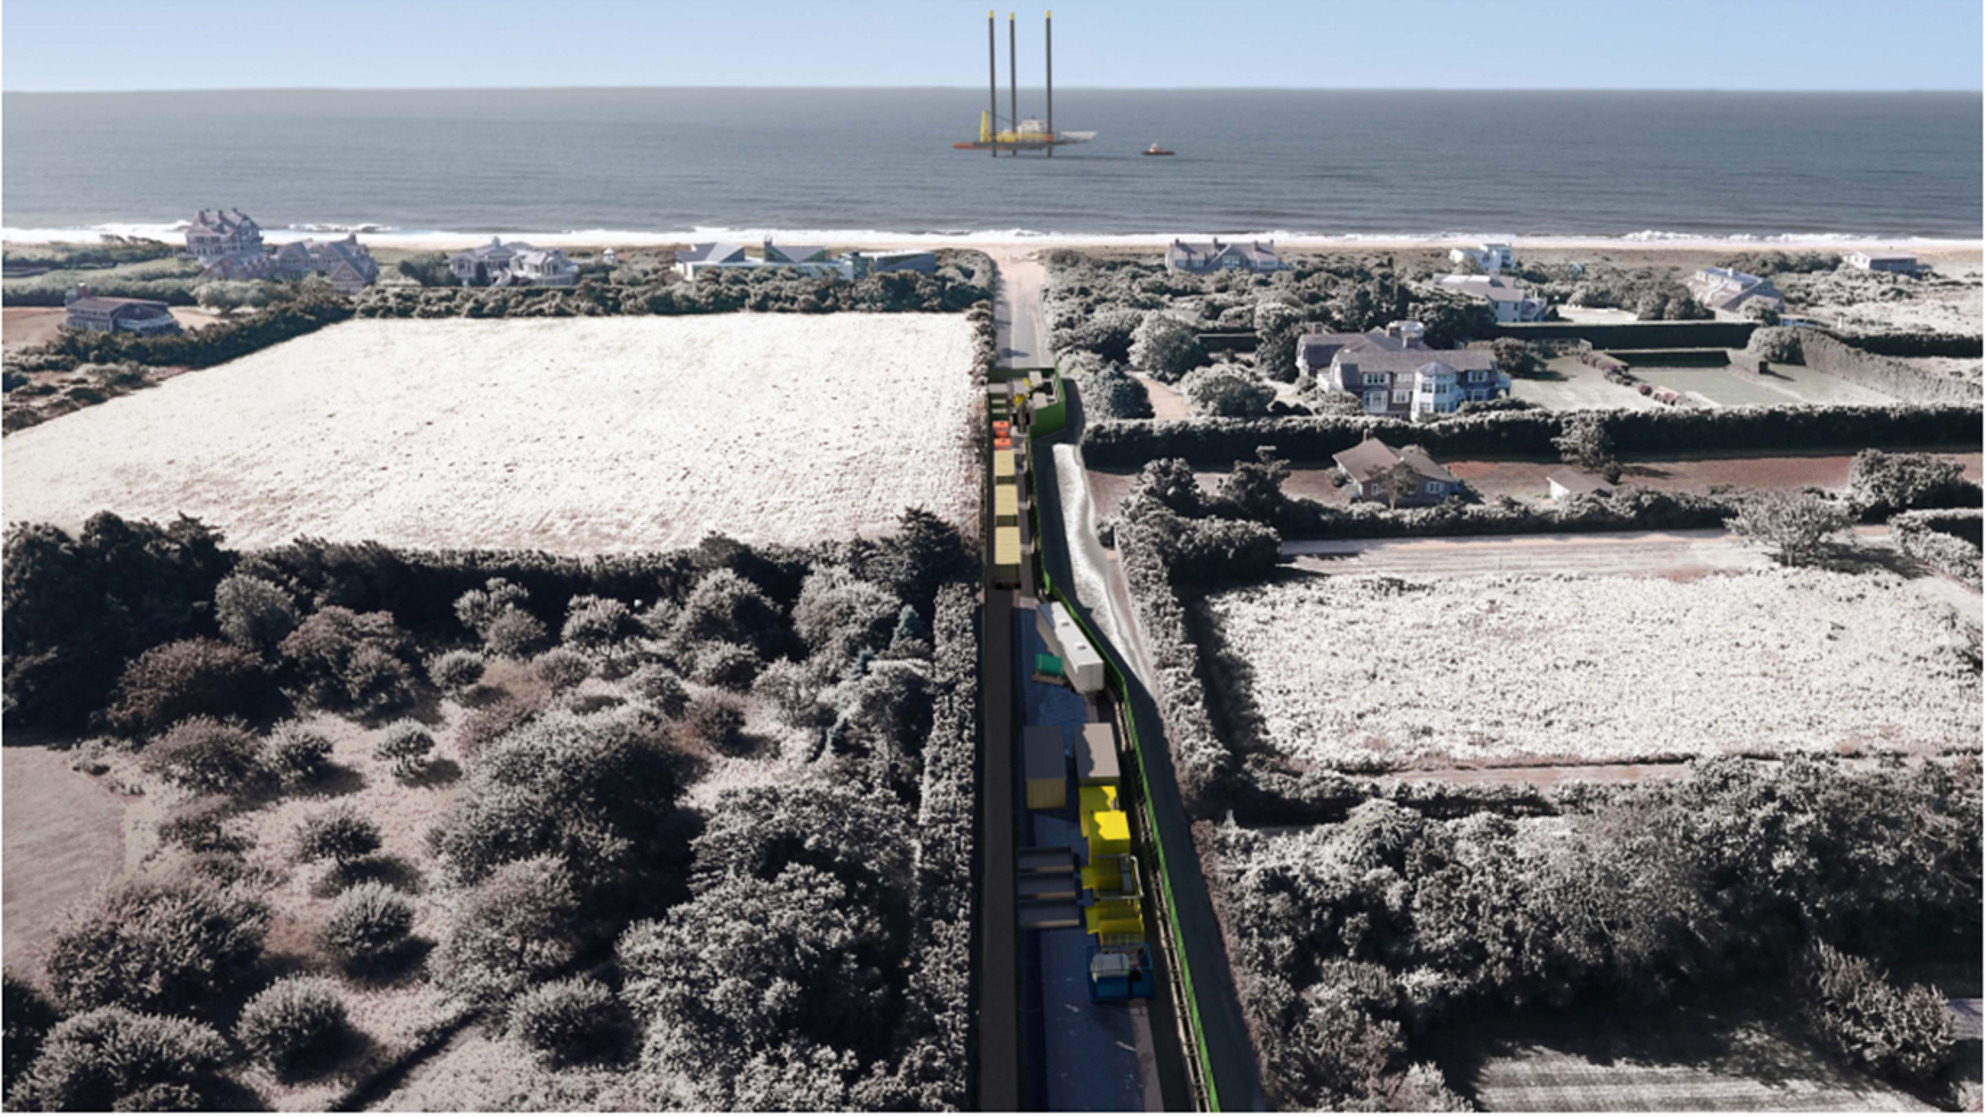 A sketch of what South Fork Wind says Beach Lane will look like during the drilling of the power cable offshore conduit this winter. The drilling equipment will take up most of the roadway but a 10-foot-wide lane will be maintained at all times allowing access to homes and the beach parking lot.